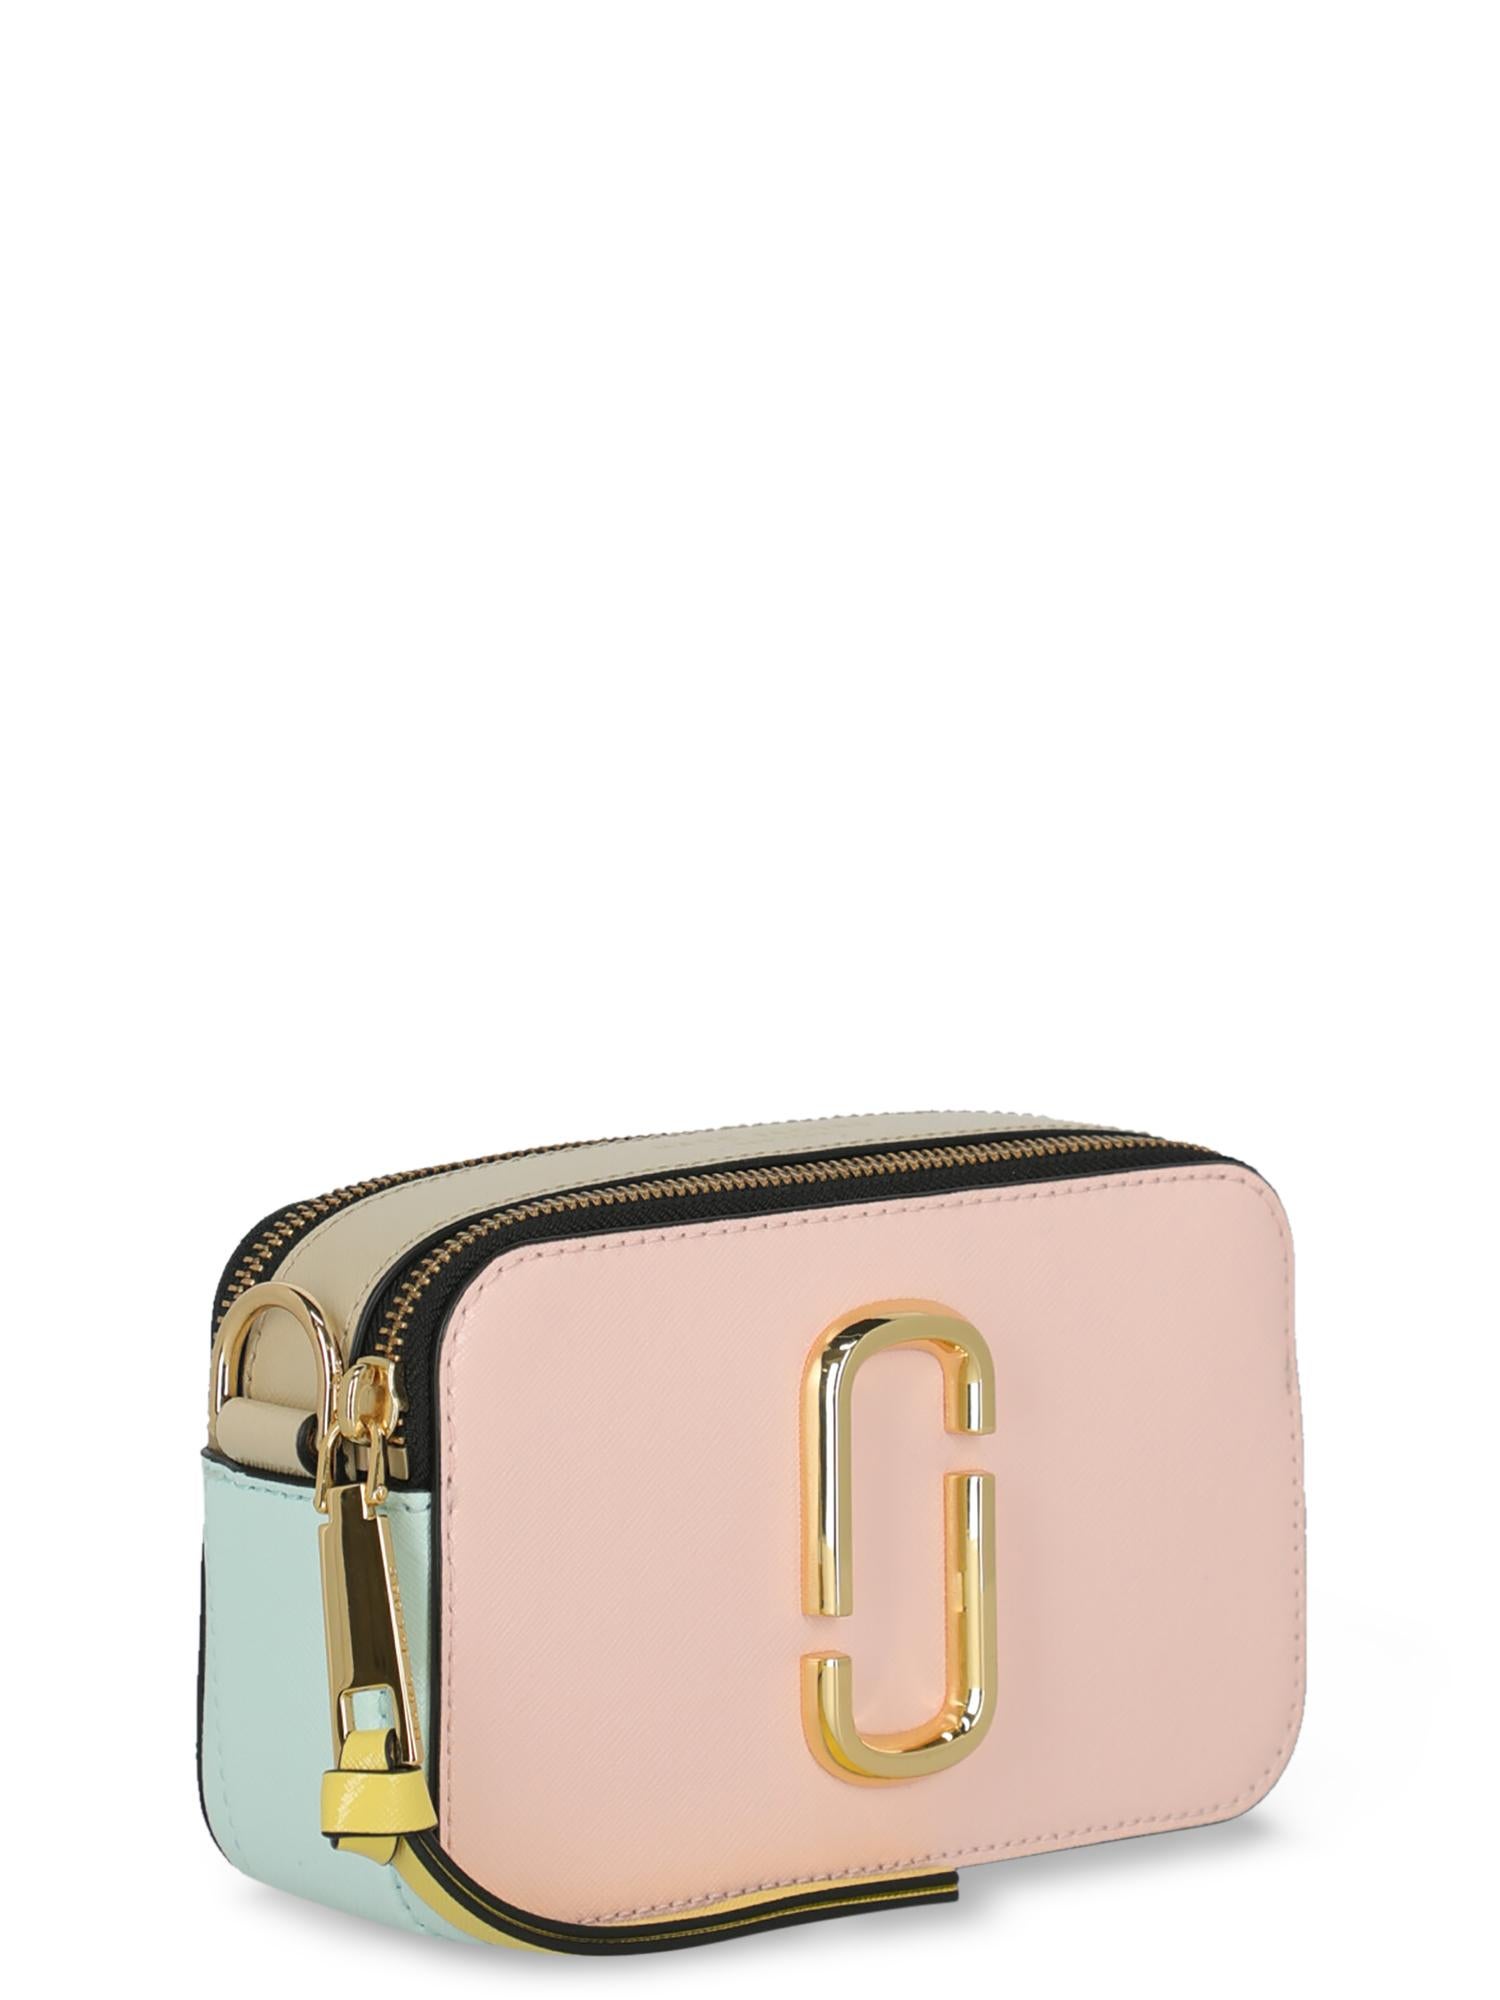 pink and blue marc jacobs bag